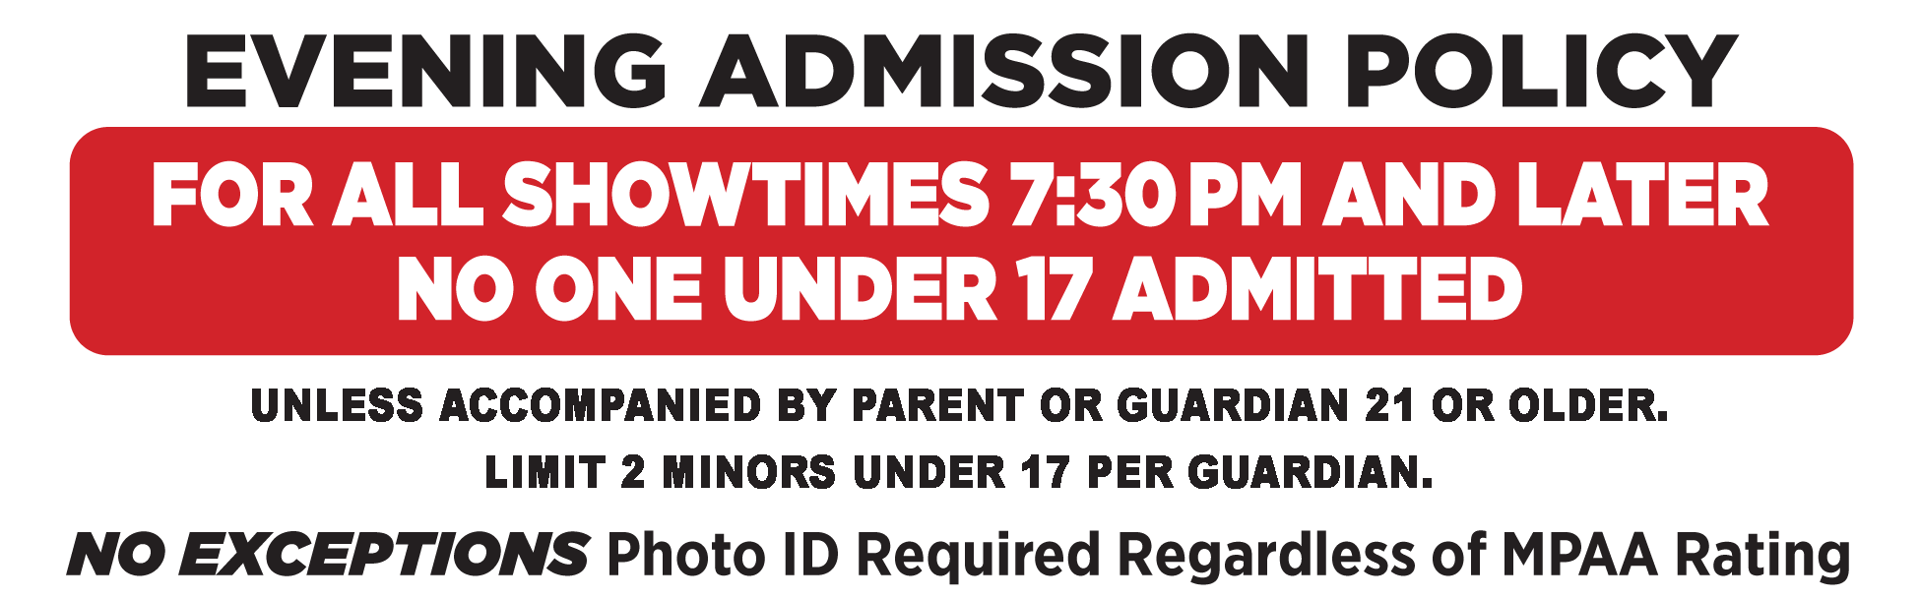 Evening Admission Policy